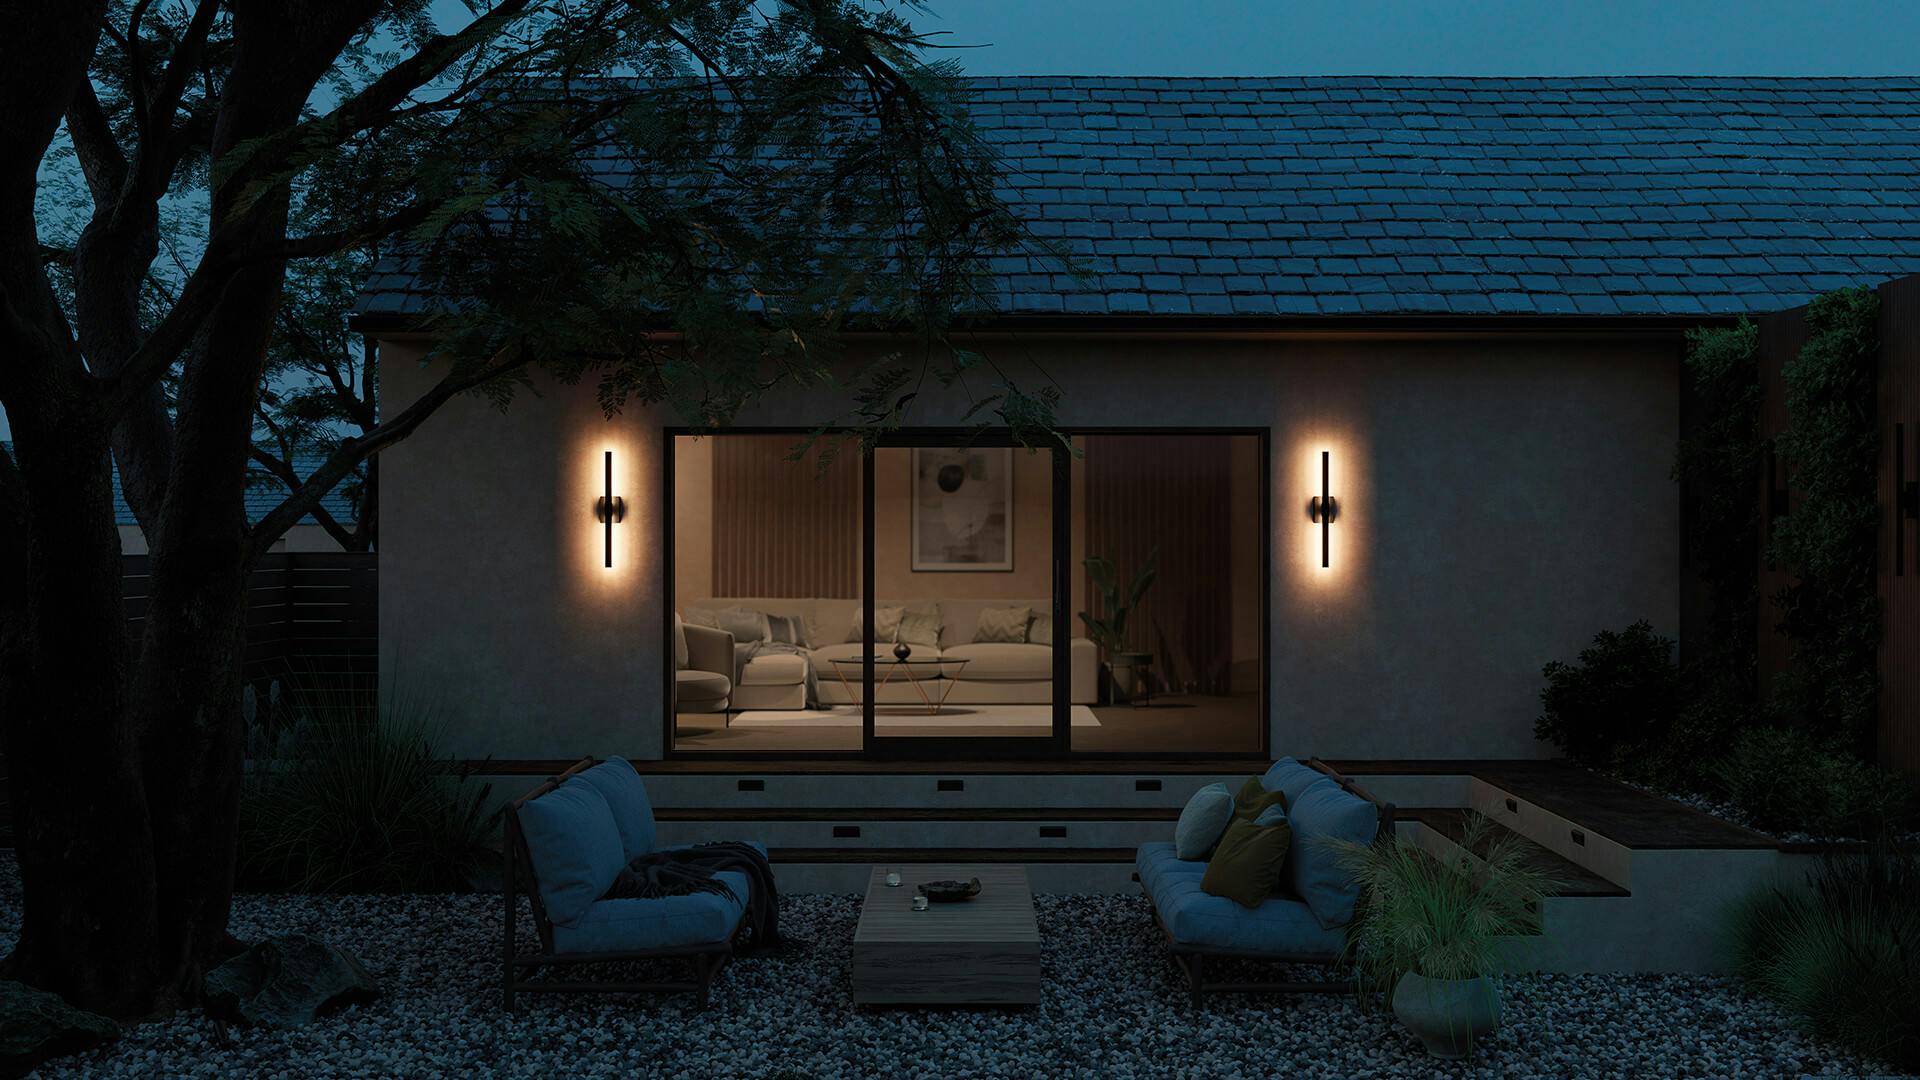 Patio with large glass sliding door at night with 2 nocar wall lights in black finish turned on